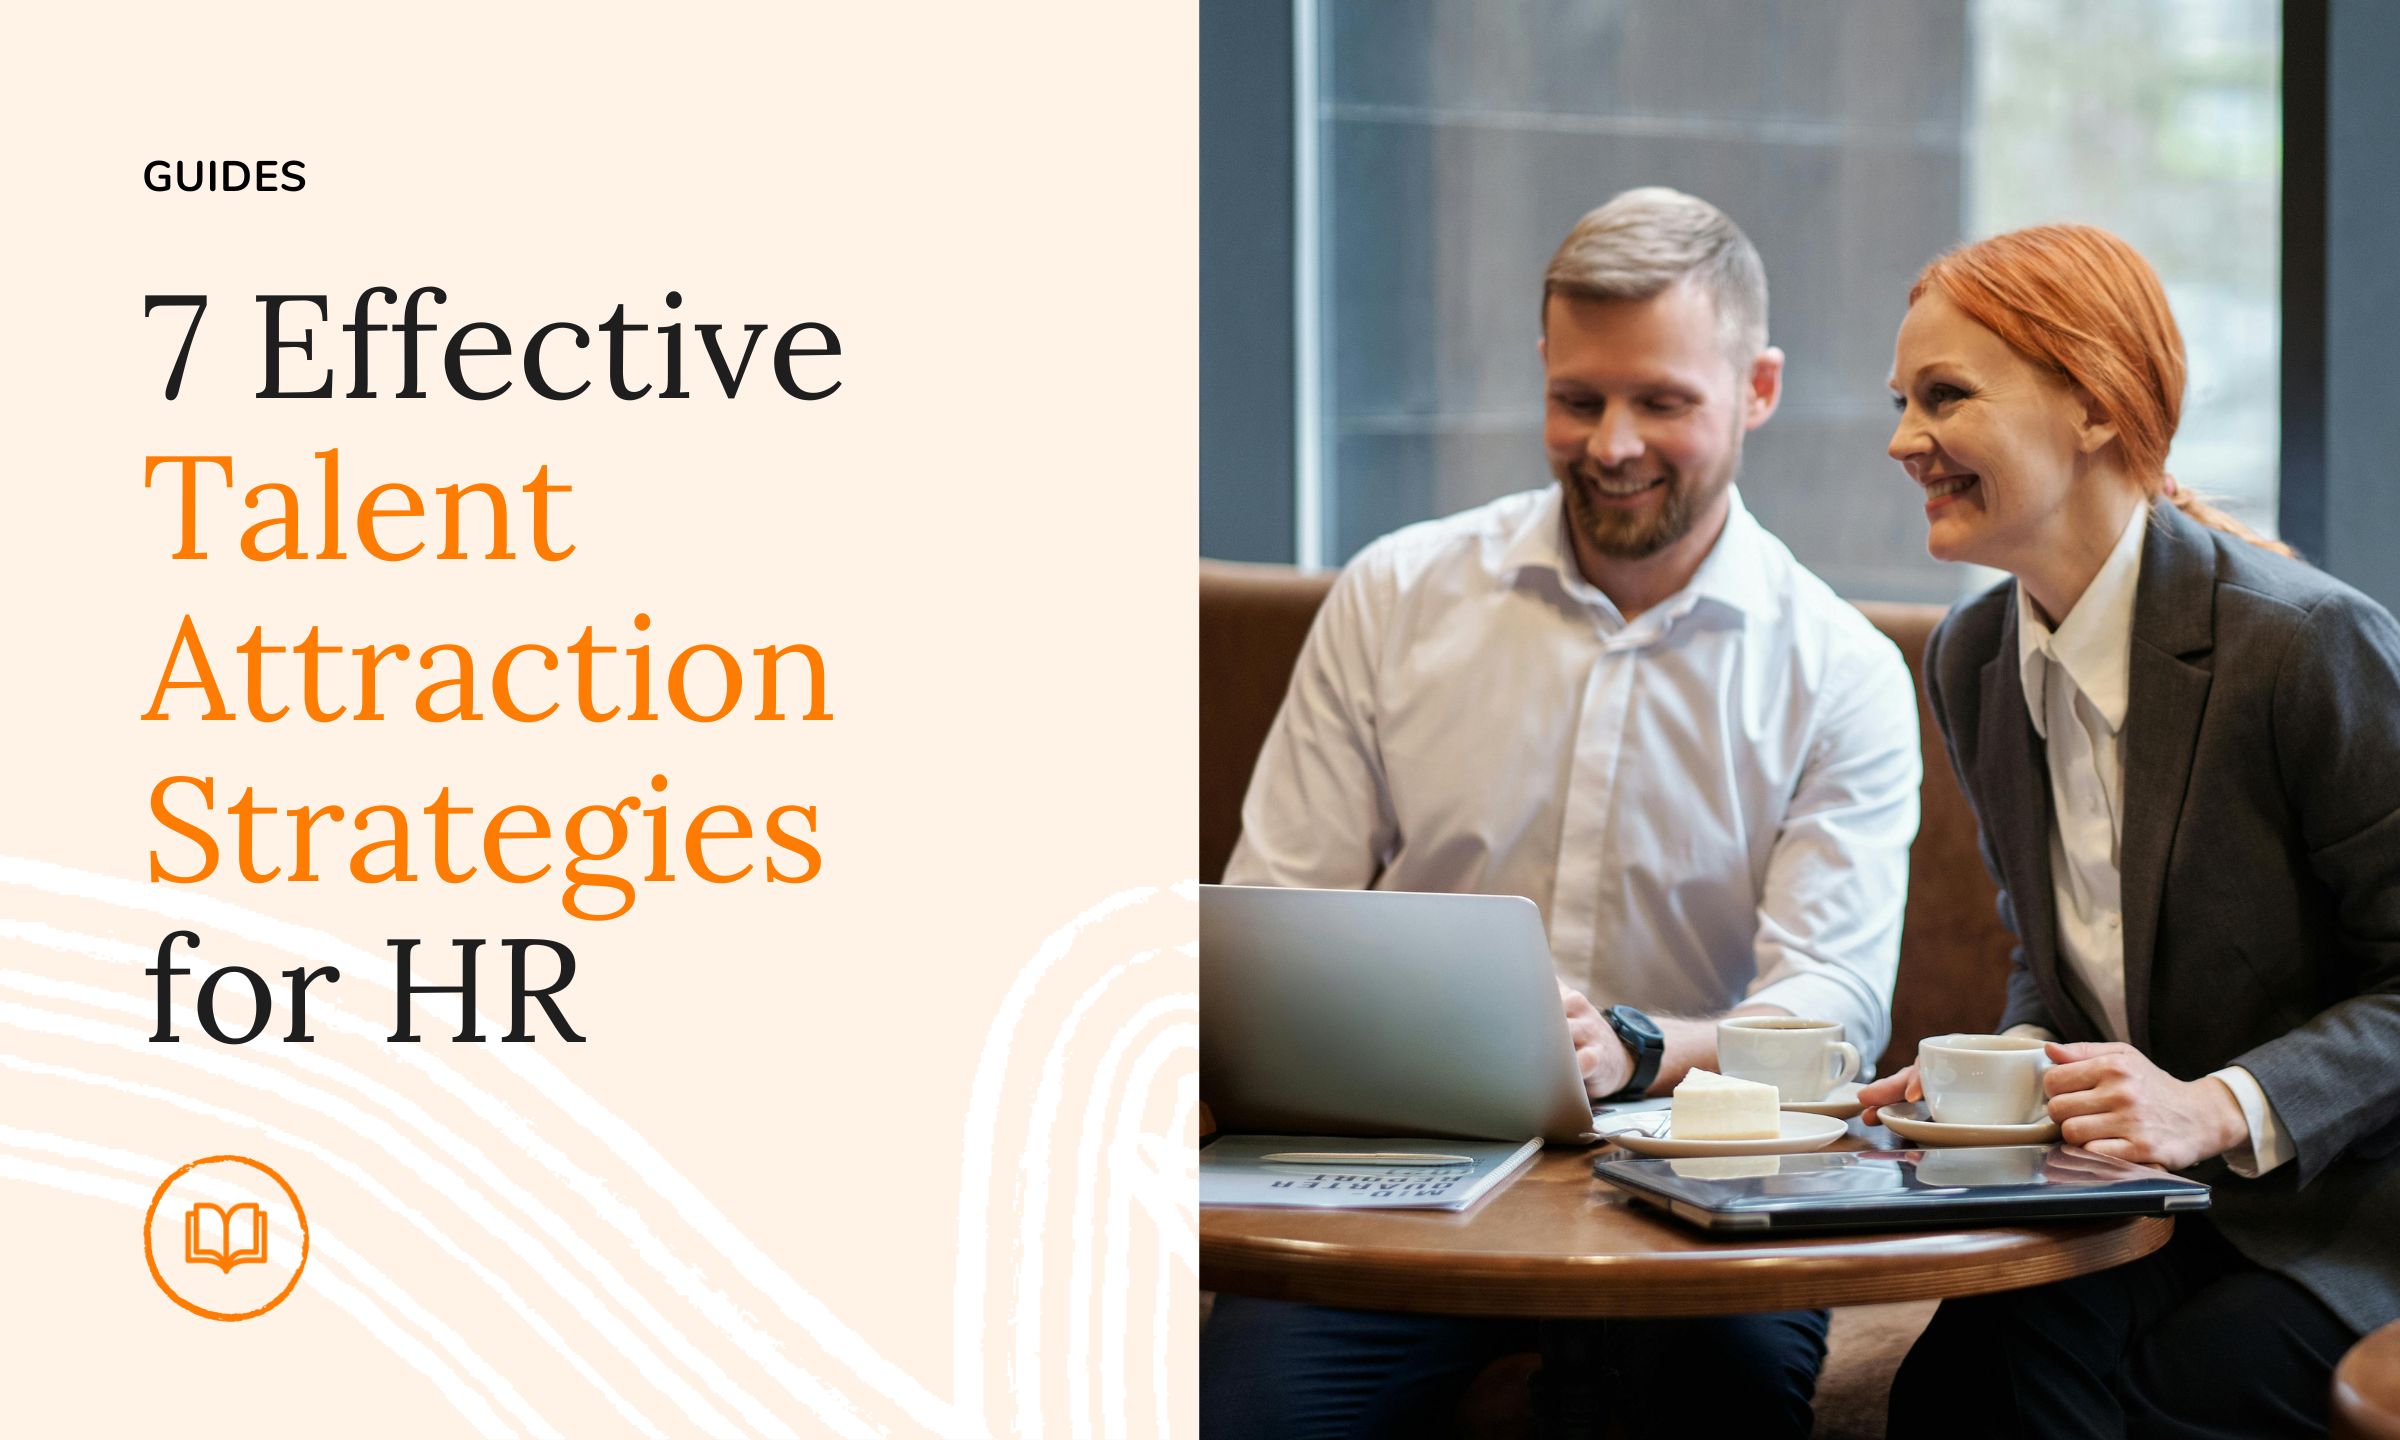 7 Effective Talent Attraction Strategies for HR